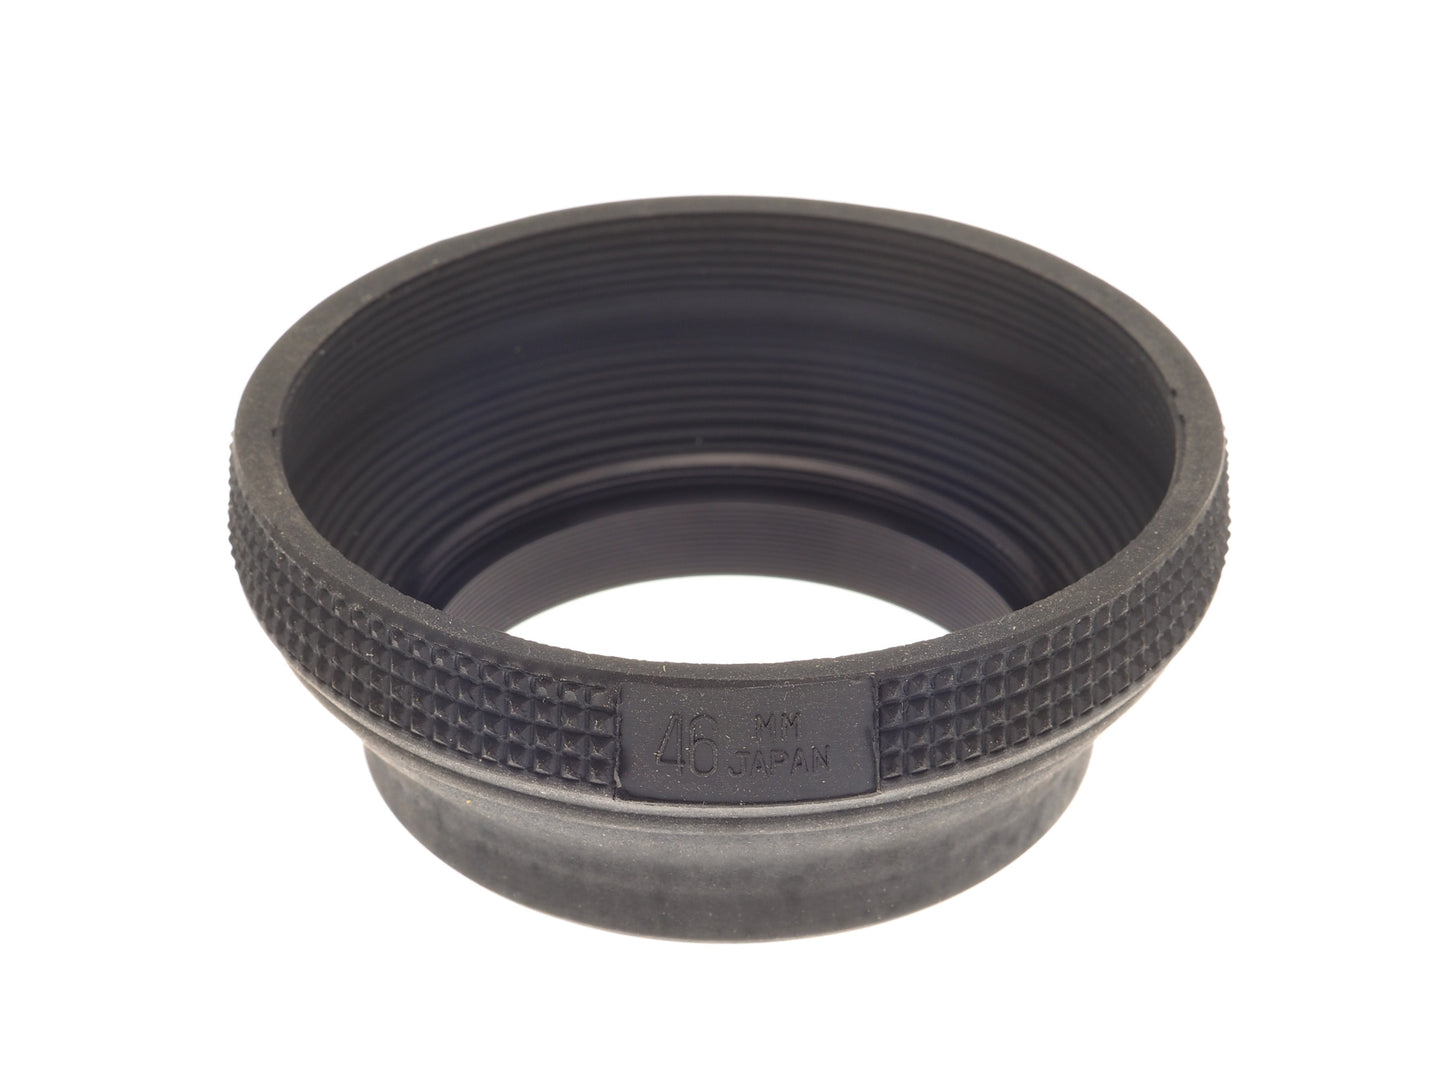 Aroma 46mm Rubber Lens Hood - Accessory